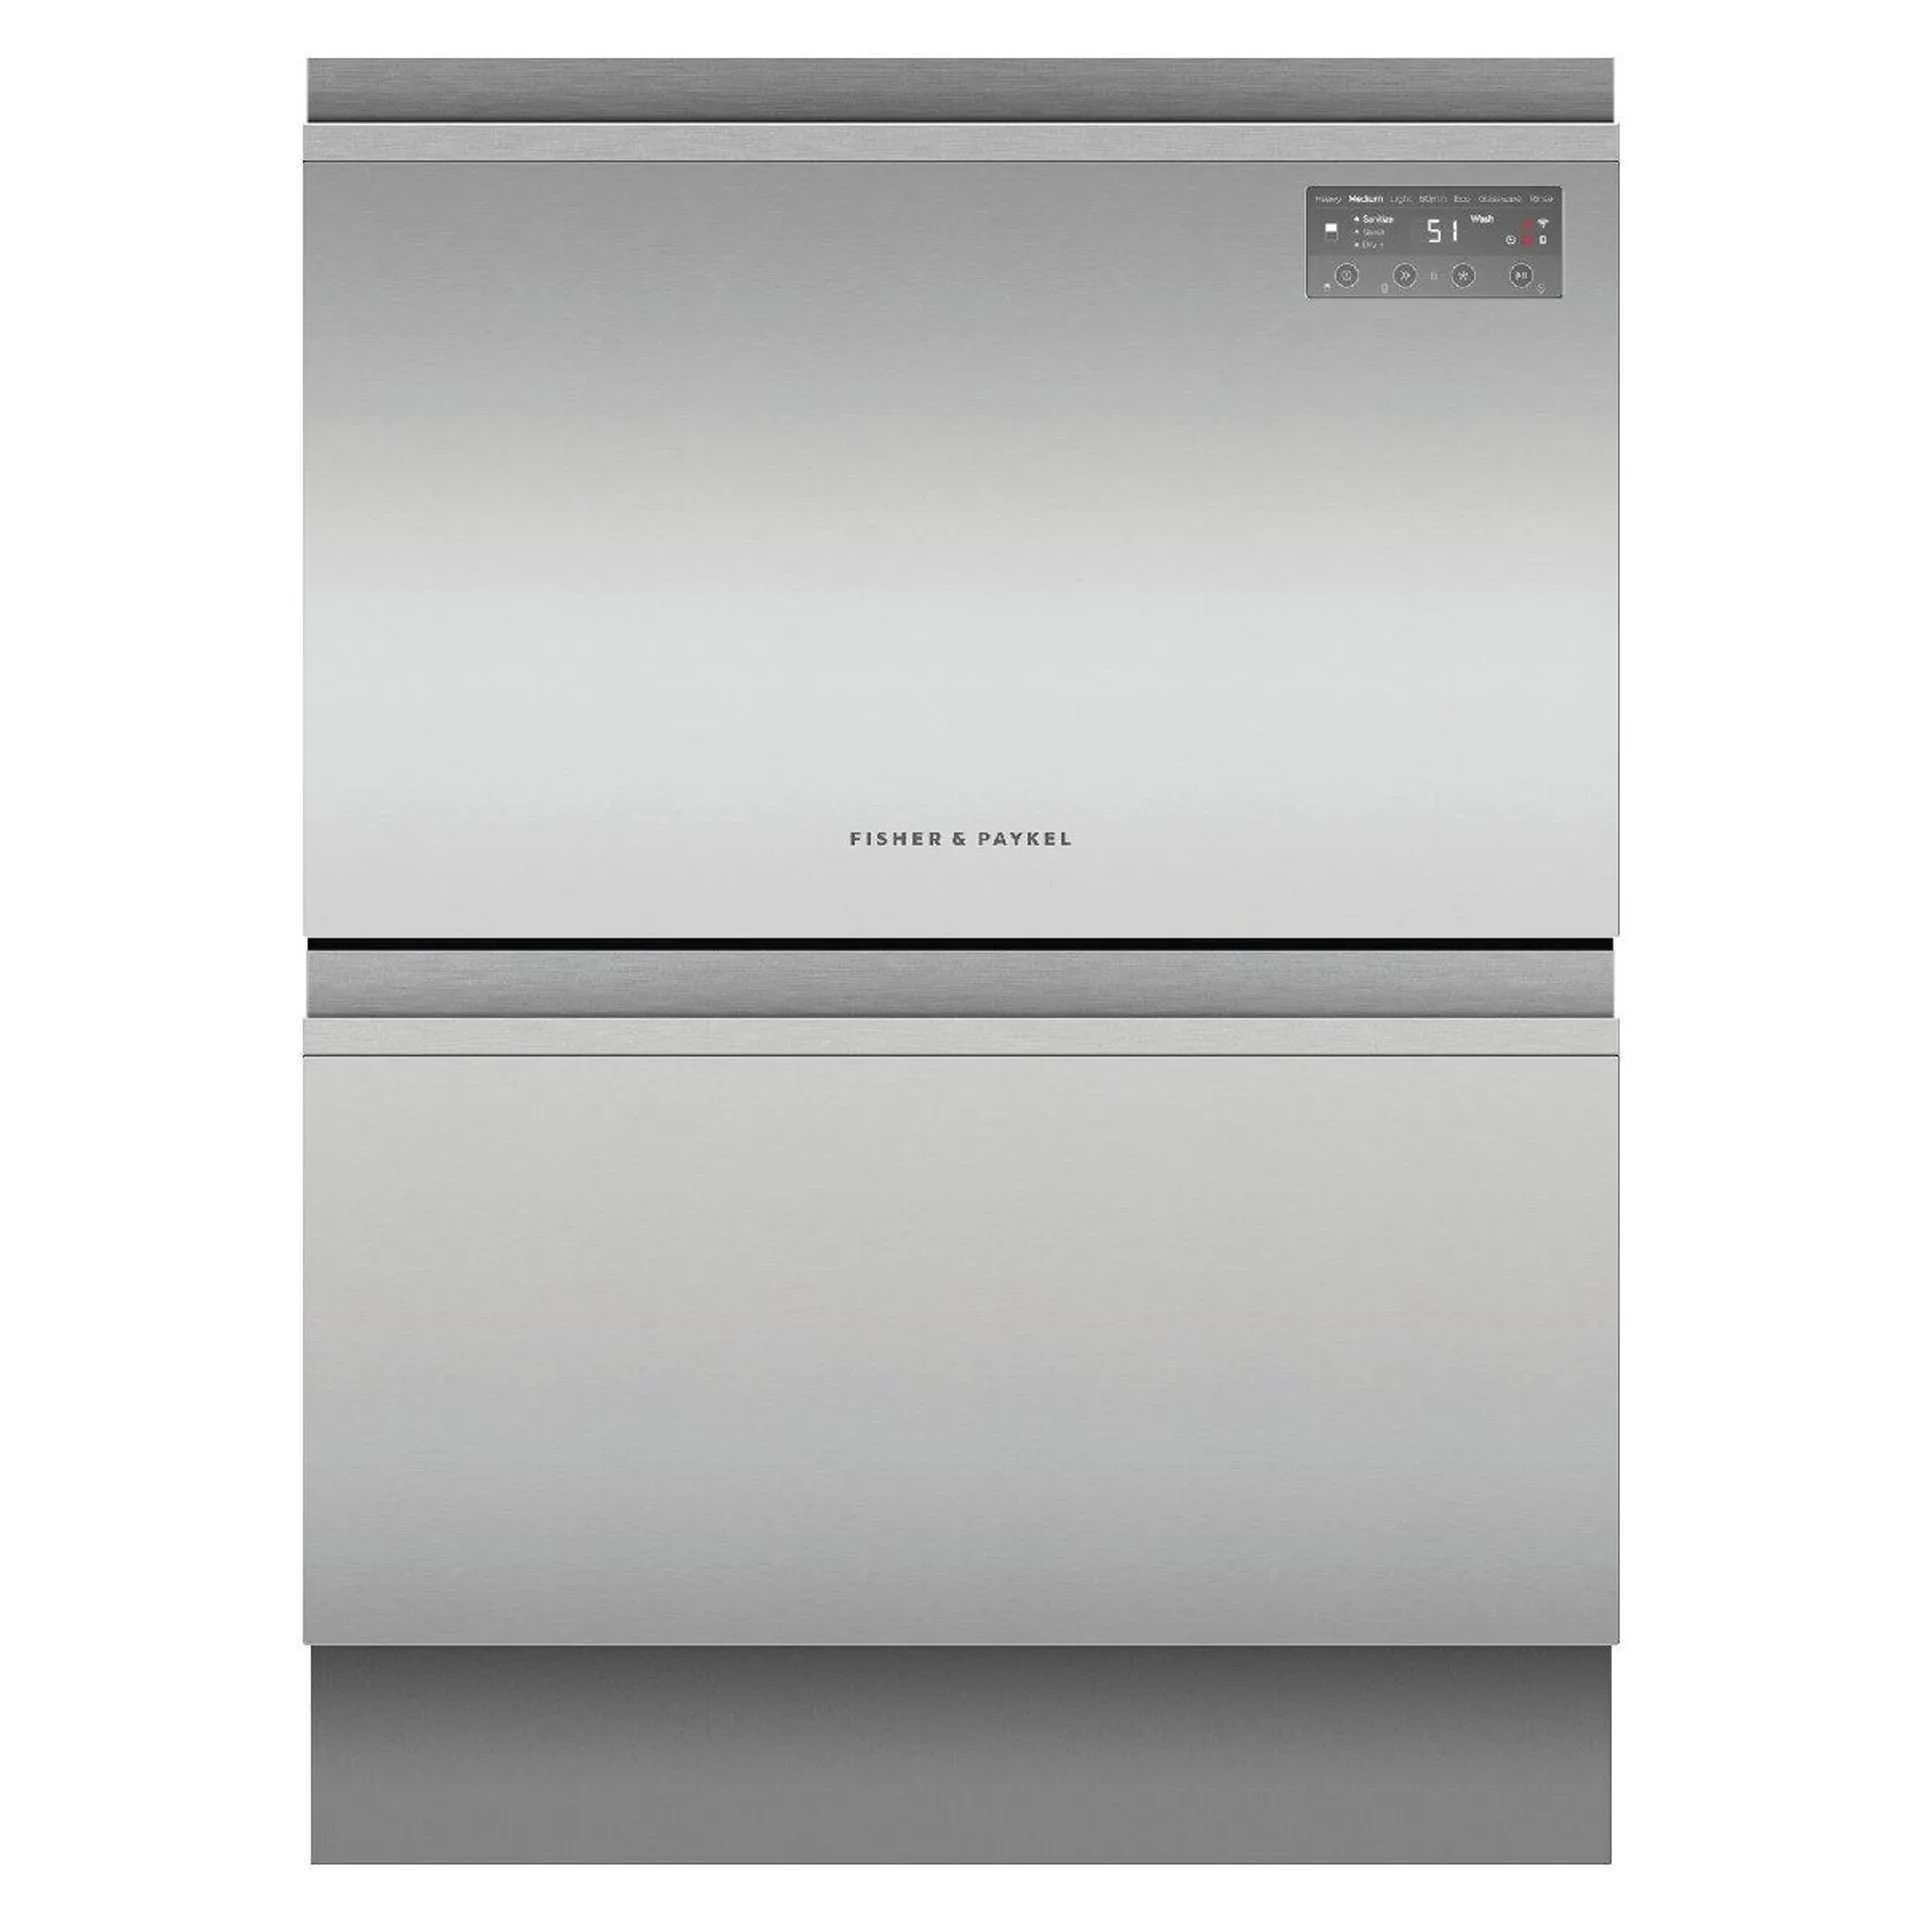 Fisher & Paykel Built-Under Double DishDrawer Dishwasher - Stainless Steel DD60D2NX9